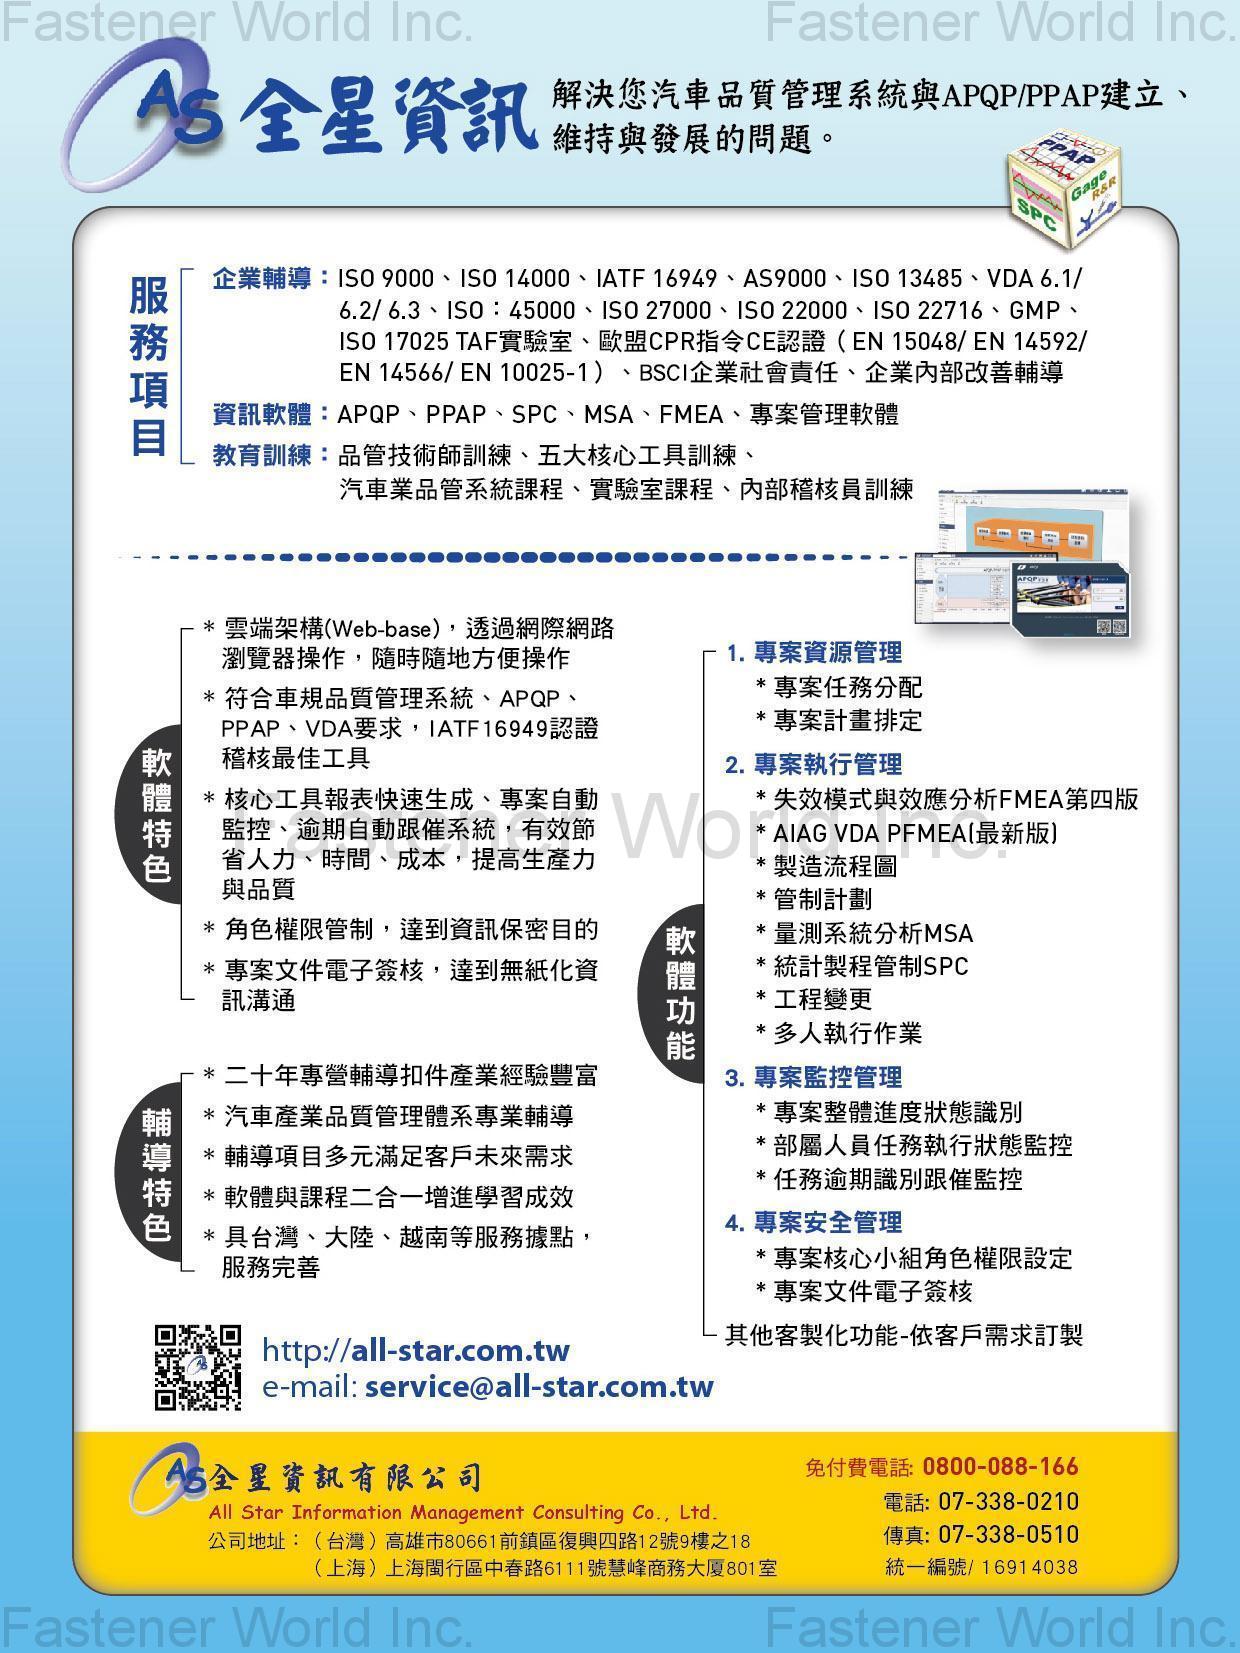 ALLSTAR INFORMATION MANAGEMENT CONSULTING CO., LTD , PPAP DOCUMENTS